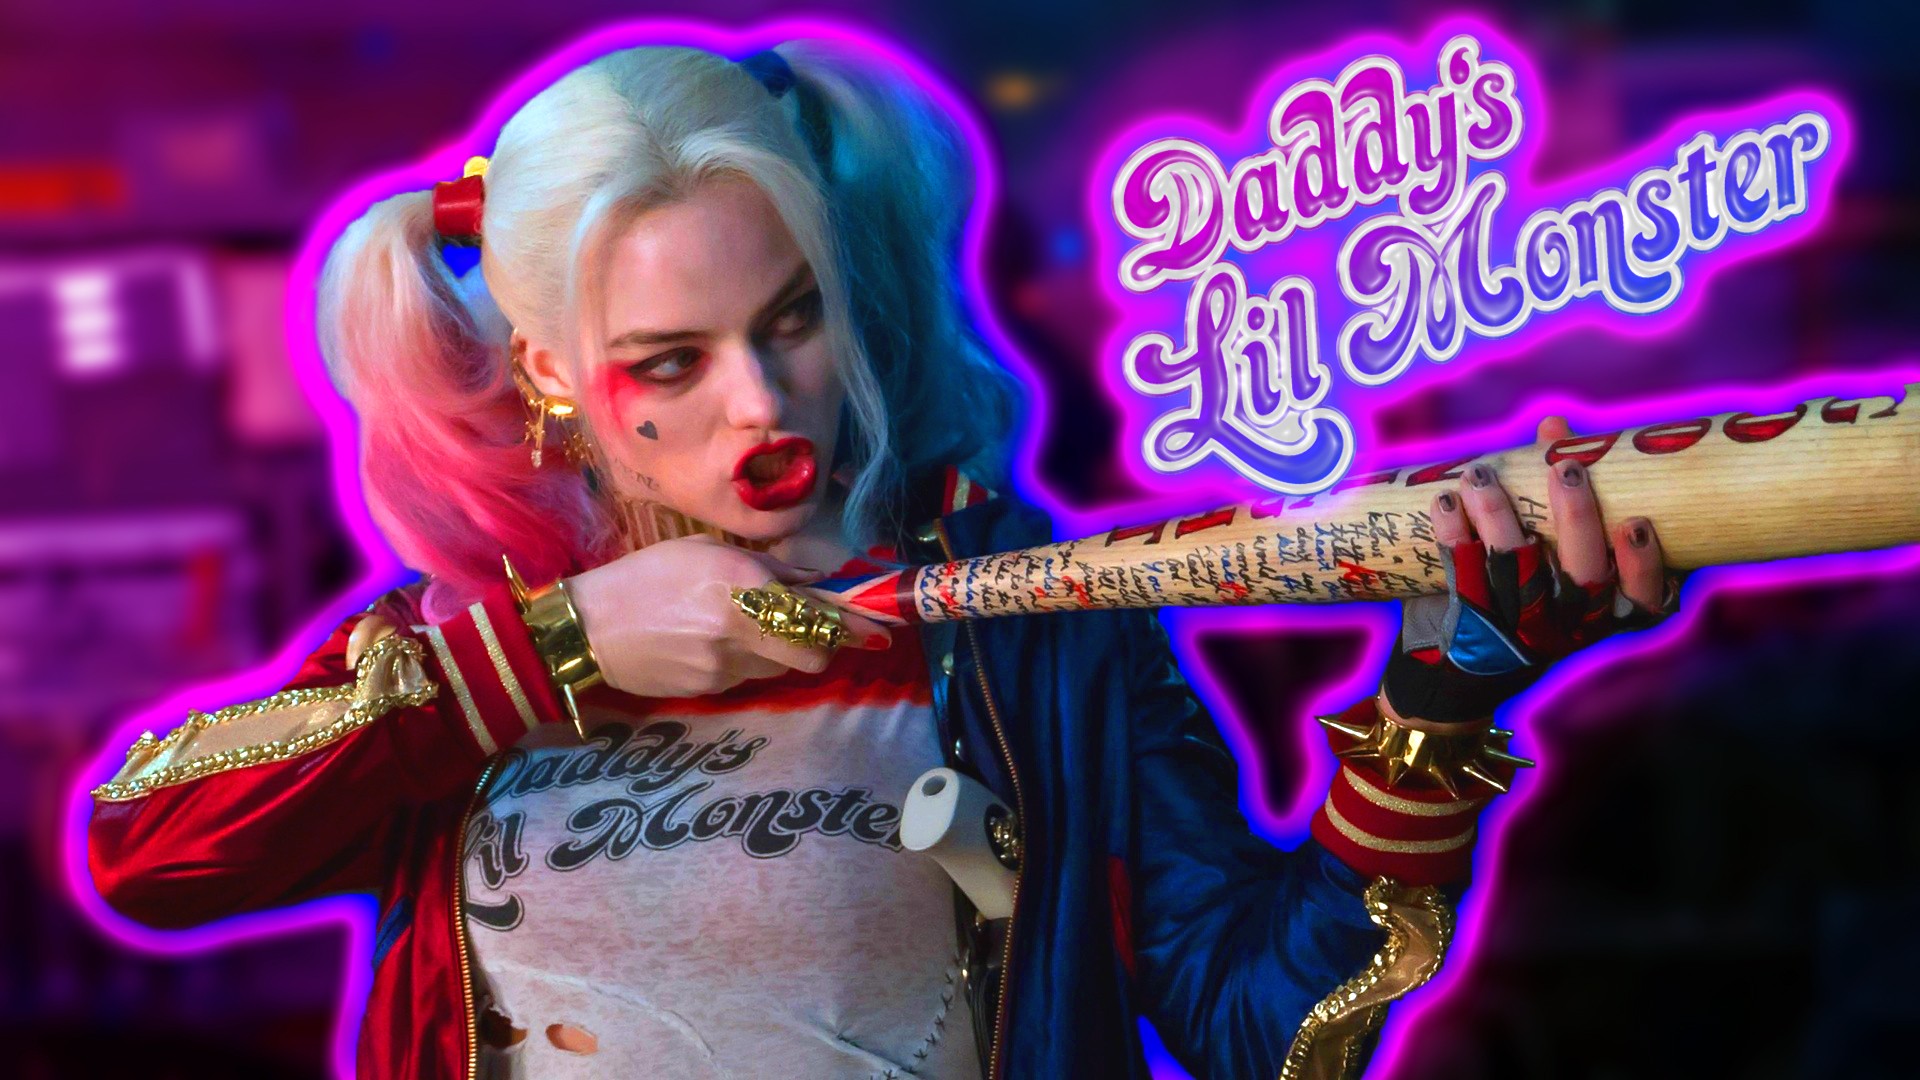 Harley Quinn Desktop Wallpaper with image resolution 1920x1080 pixel. You can use this wallpaper as background for your desktop Computer Screensavers, Android or iPhone smartphones